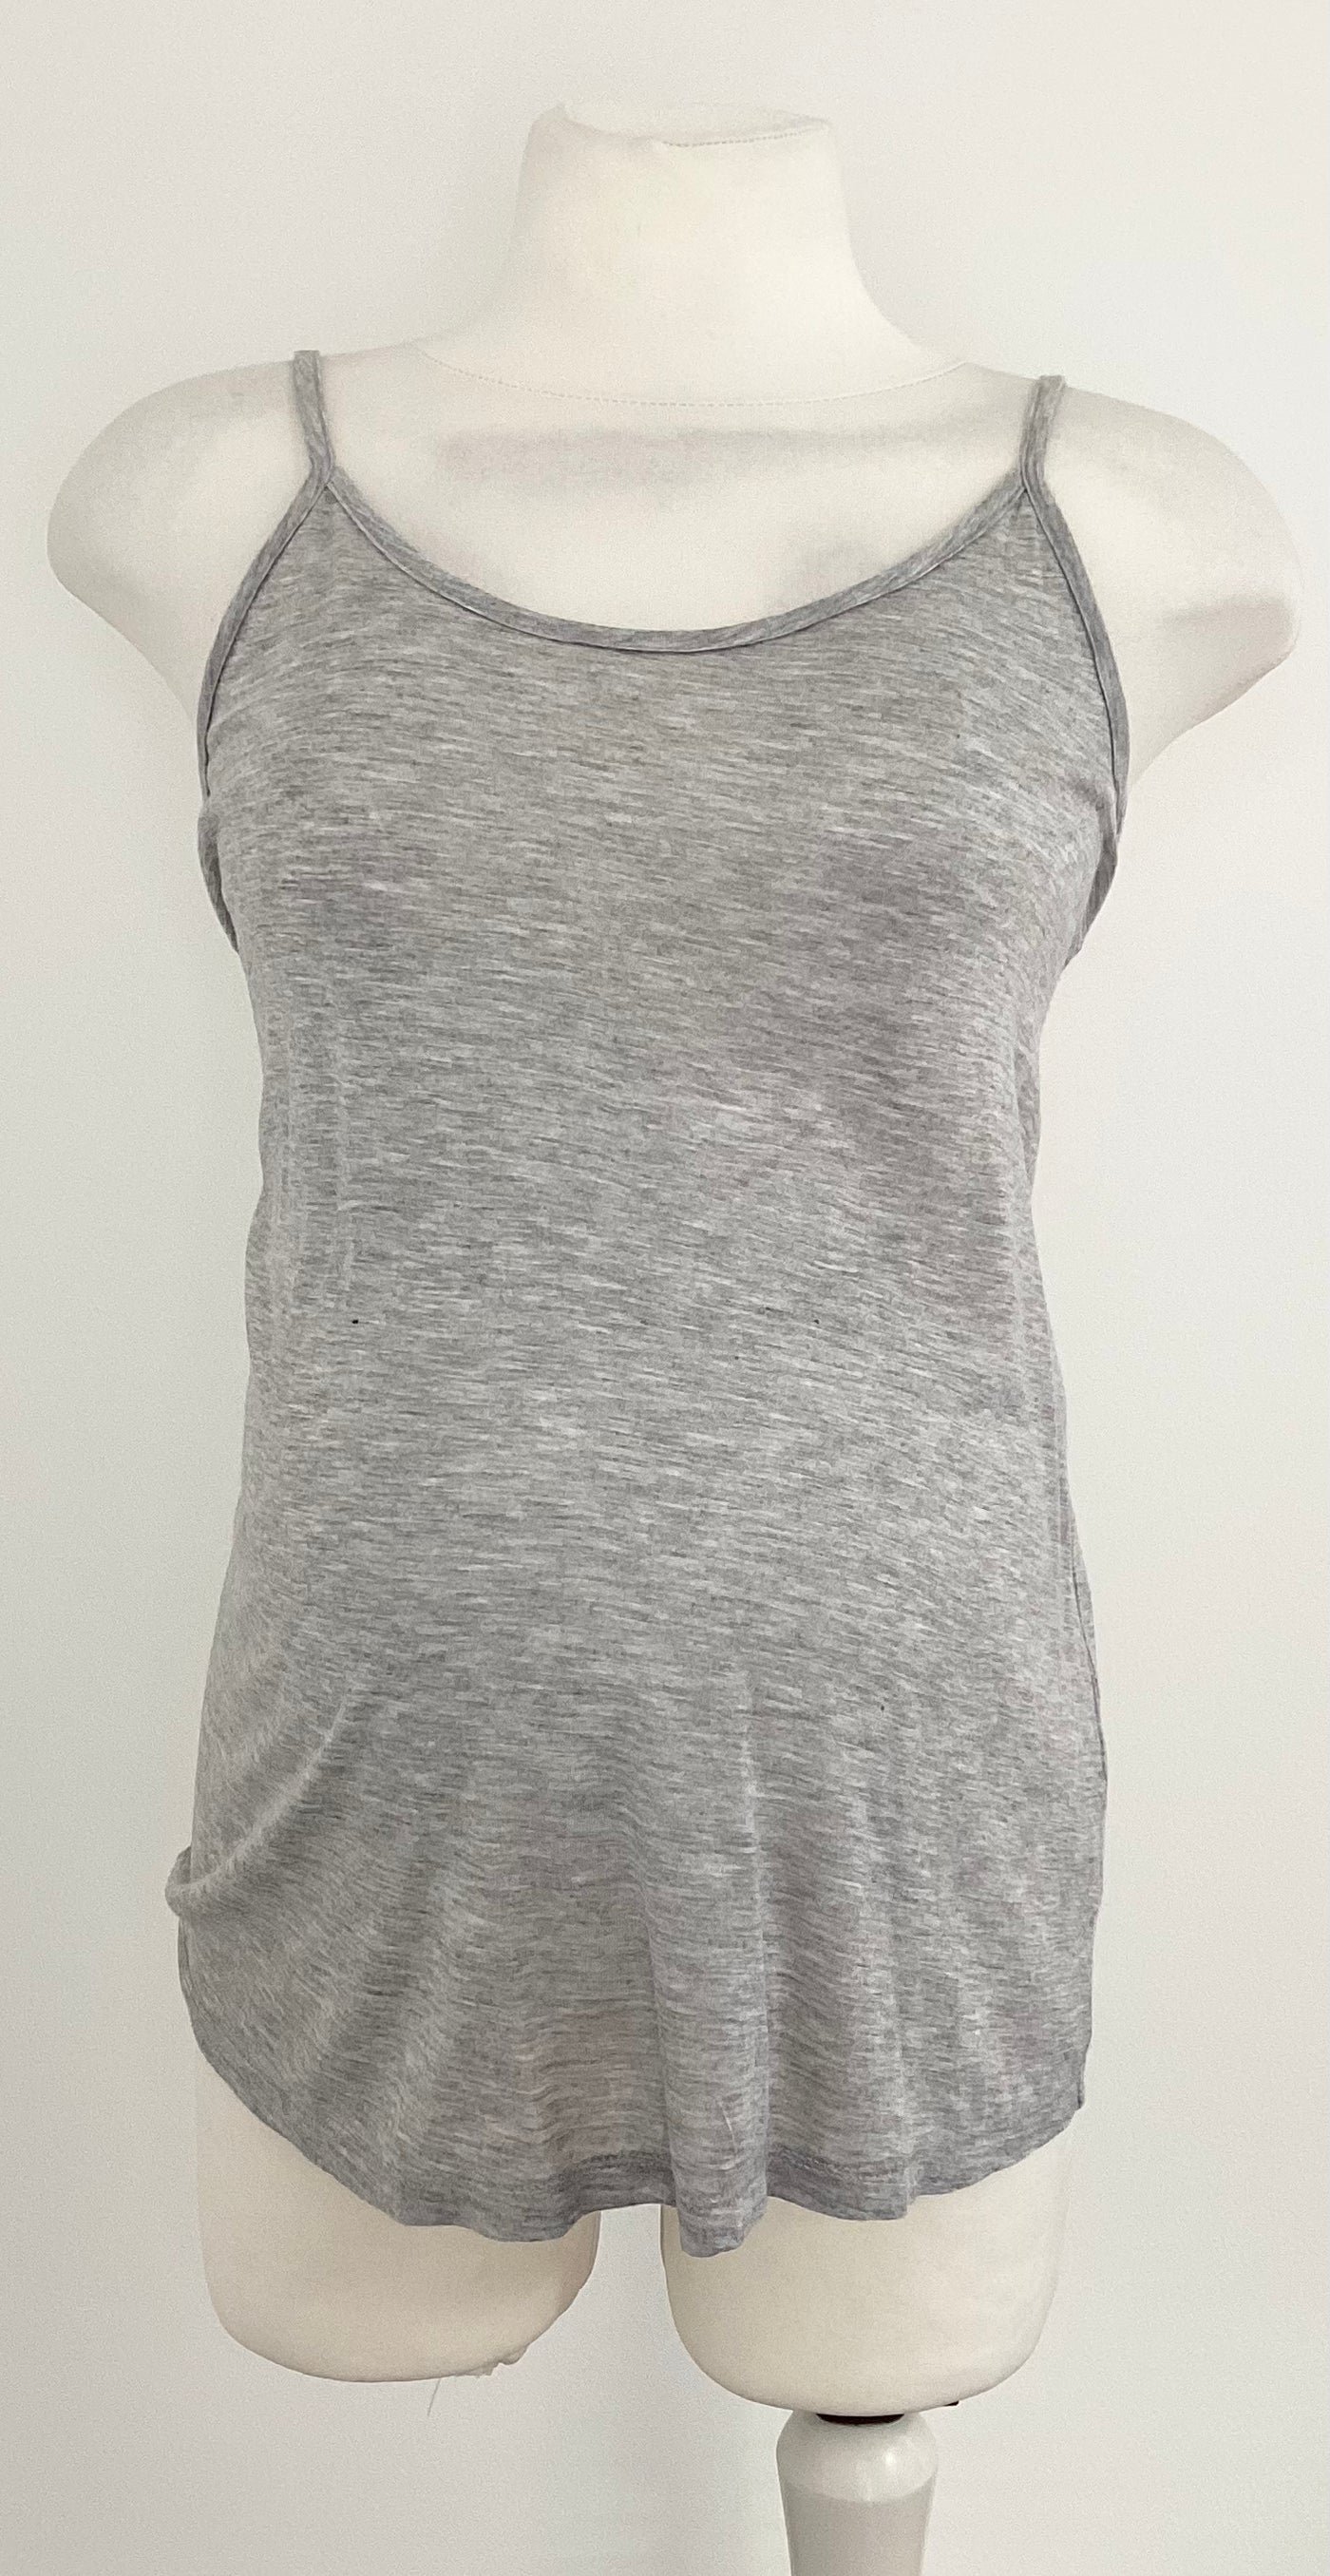 Gingersnaps Grey Maternity Camisole Top - Size 2 (Approx UK 8/10)